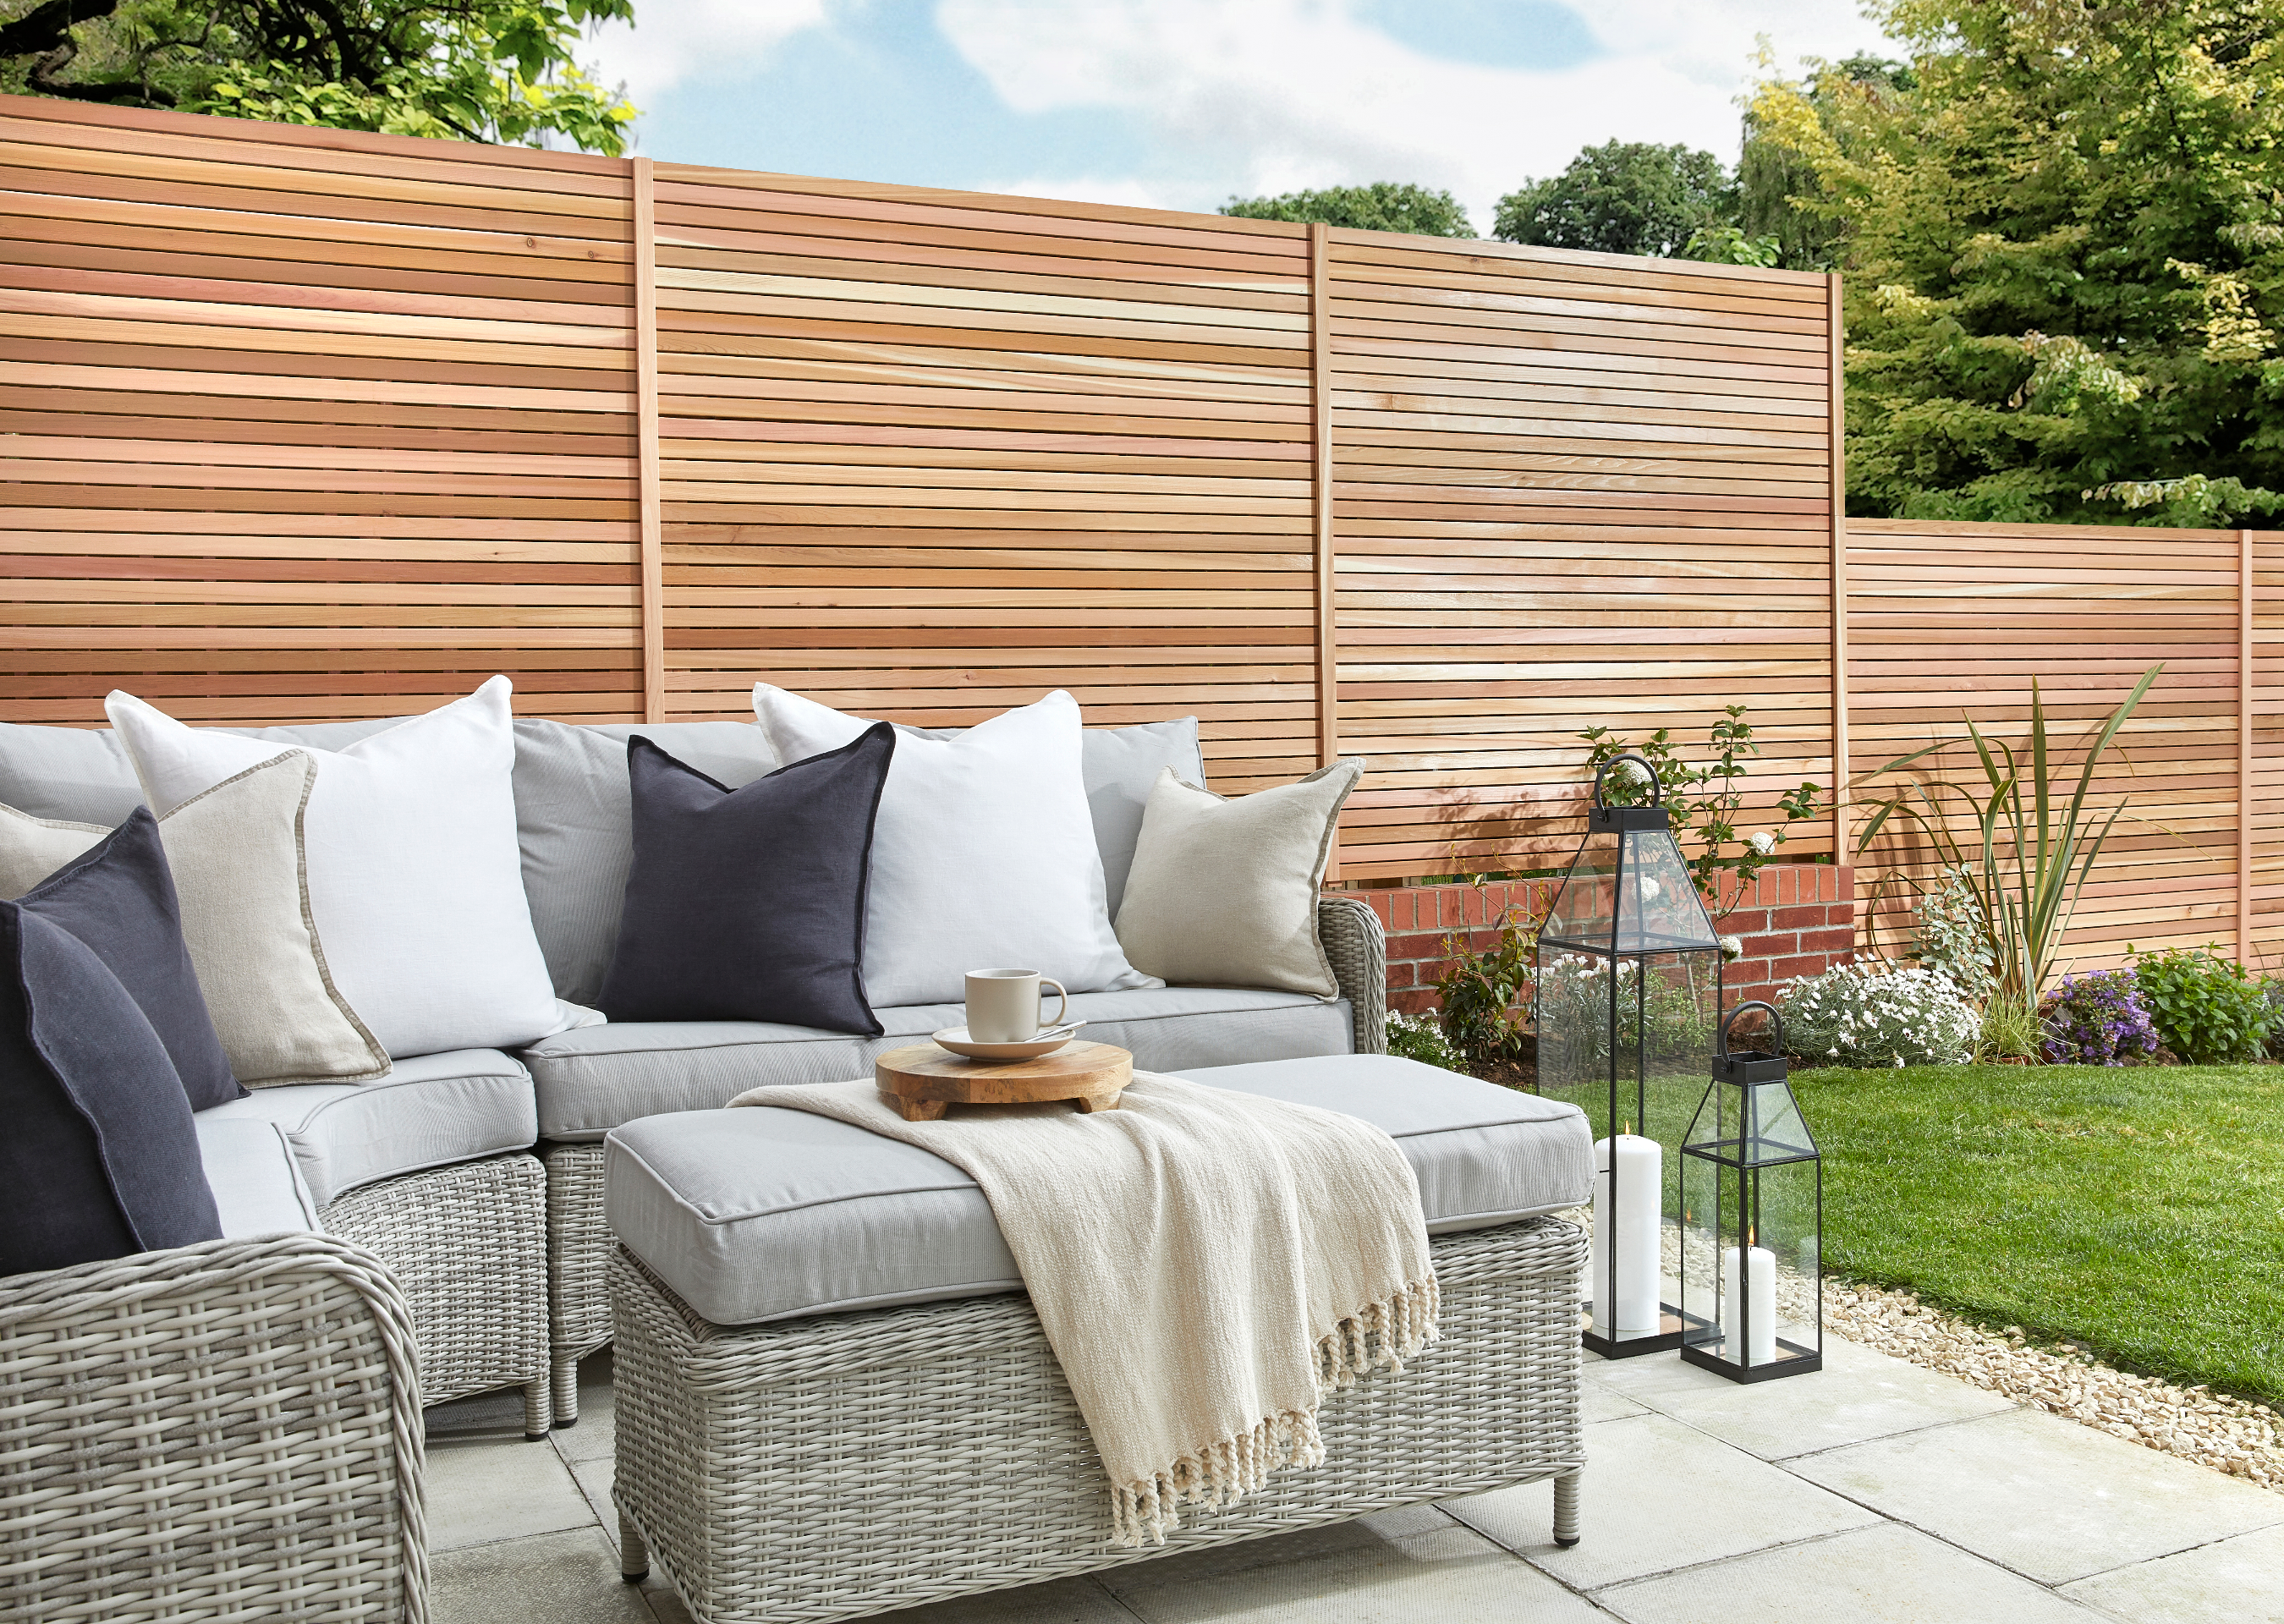 Outdoor seating area. Grey rattan sofas with white and grey soft furnishings. Cedar fence panels in the background